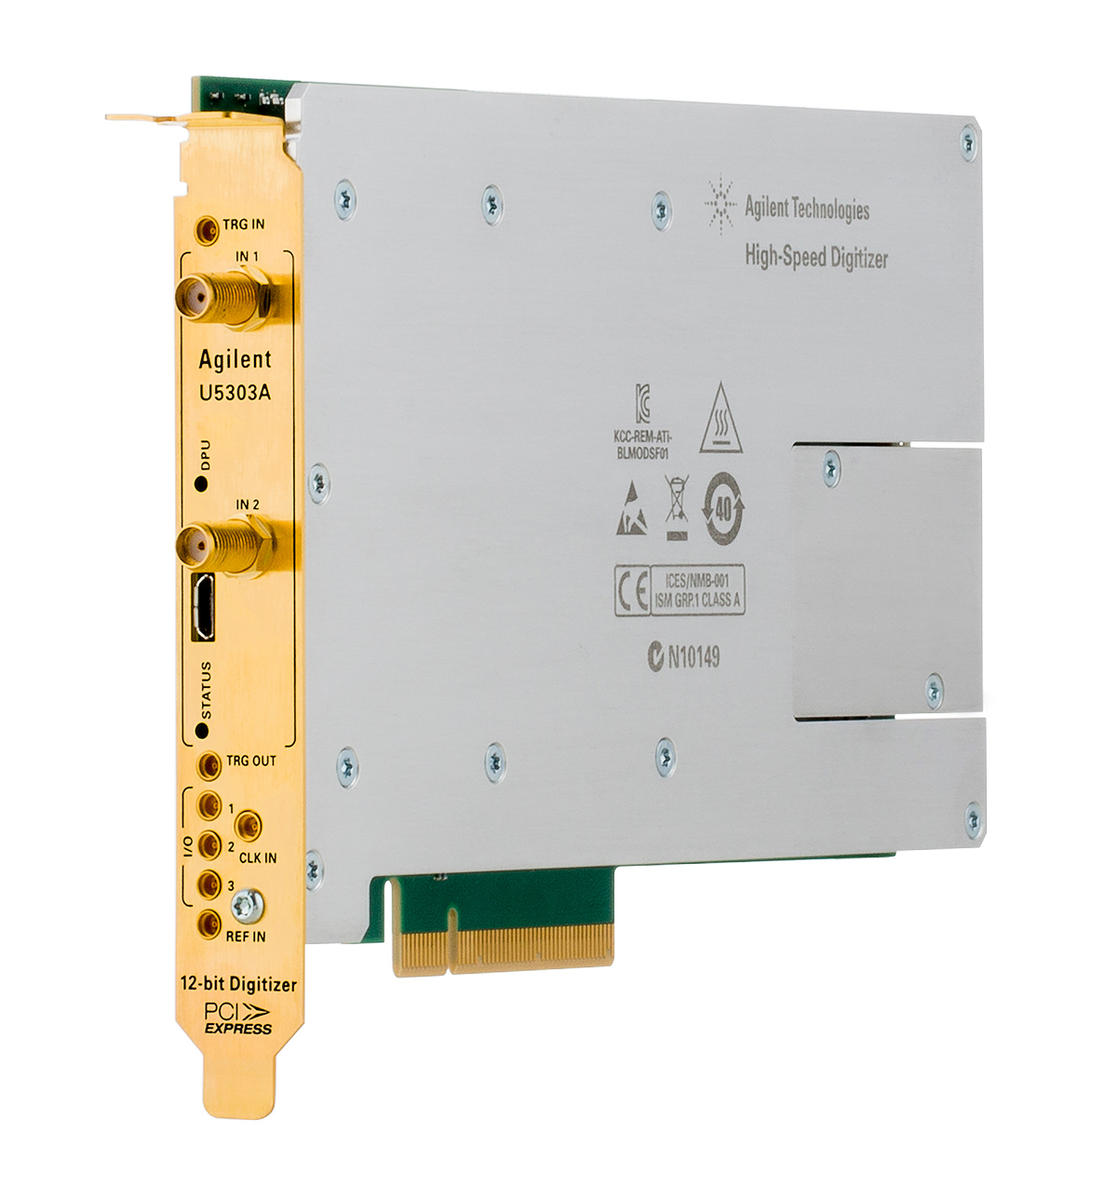 High-Precision 12-bit PCIe Digitizer delivers high effective number of bits and very low noise